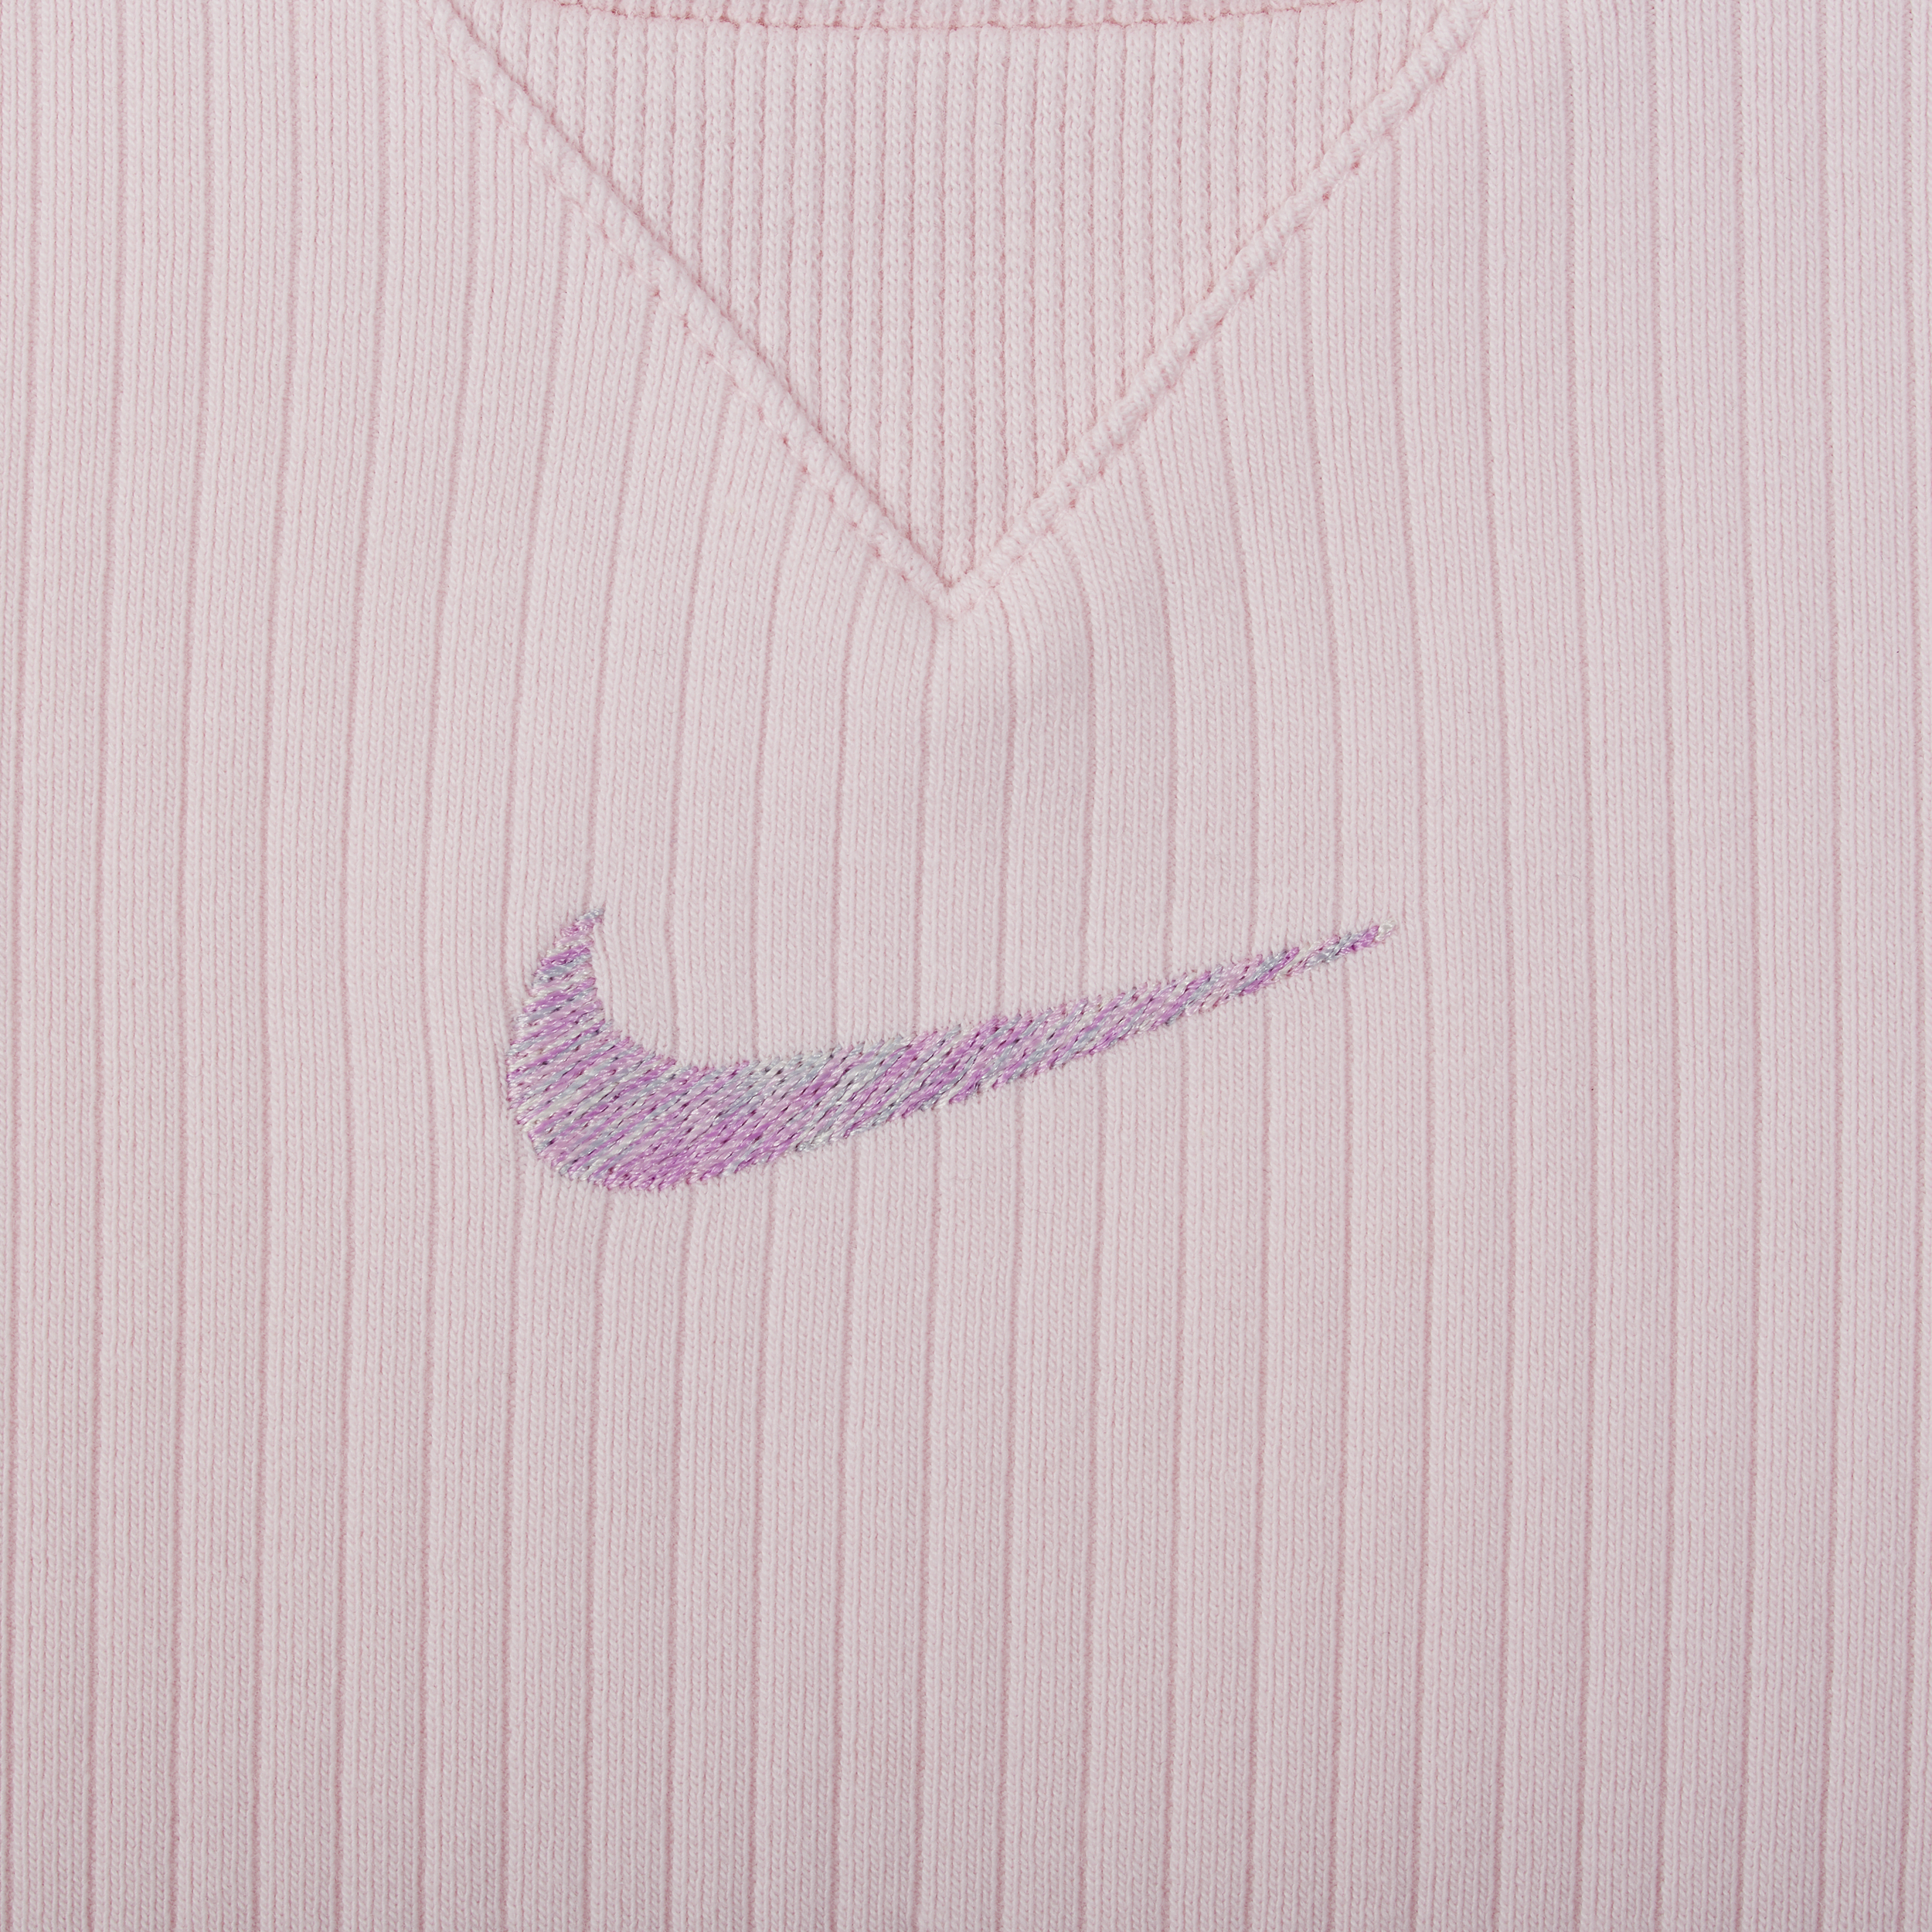 Nike 'Ready Set' coverall voor baby's Roze